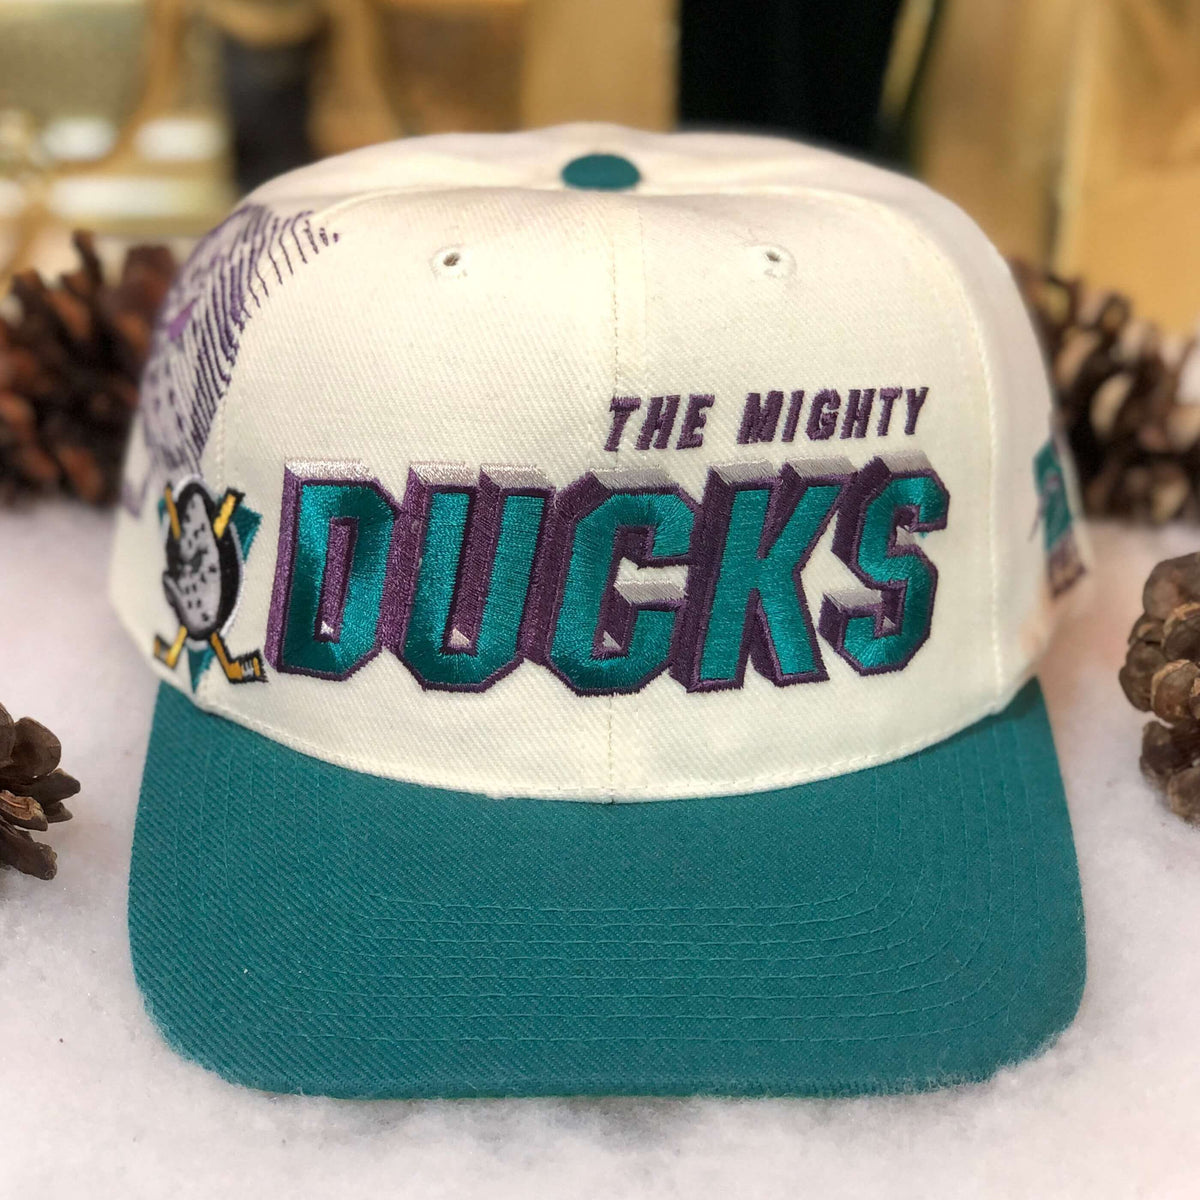 Vintage NHL Mighty Ducks the Game Snapback Hat 